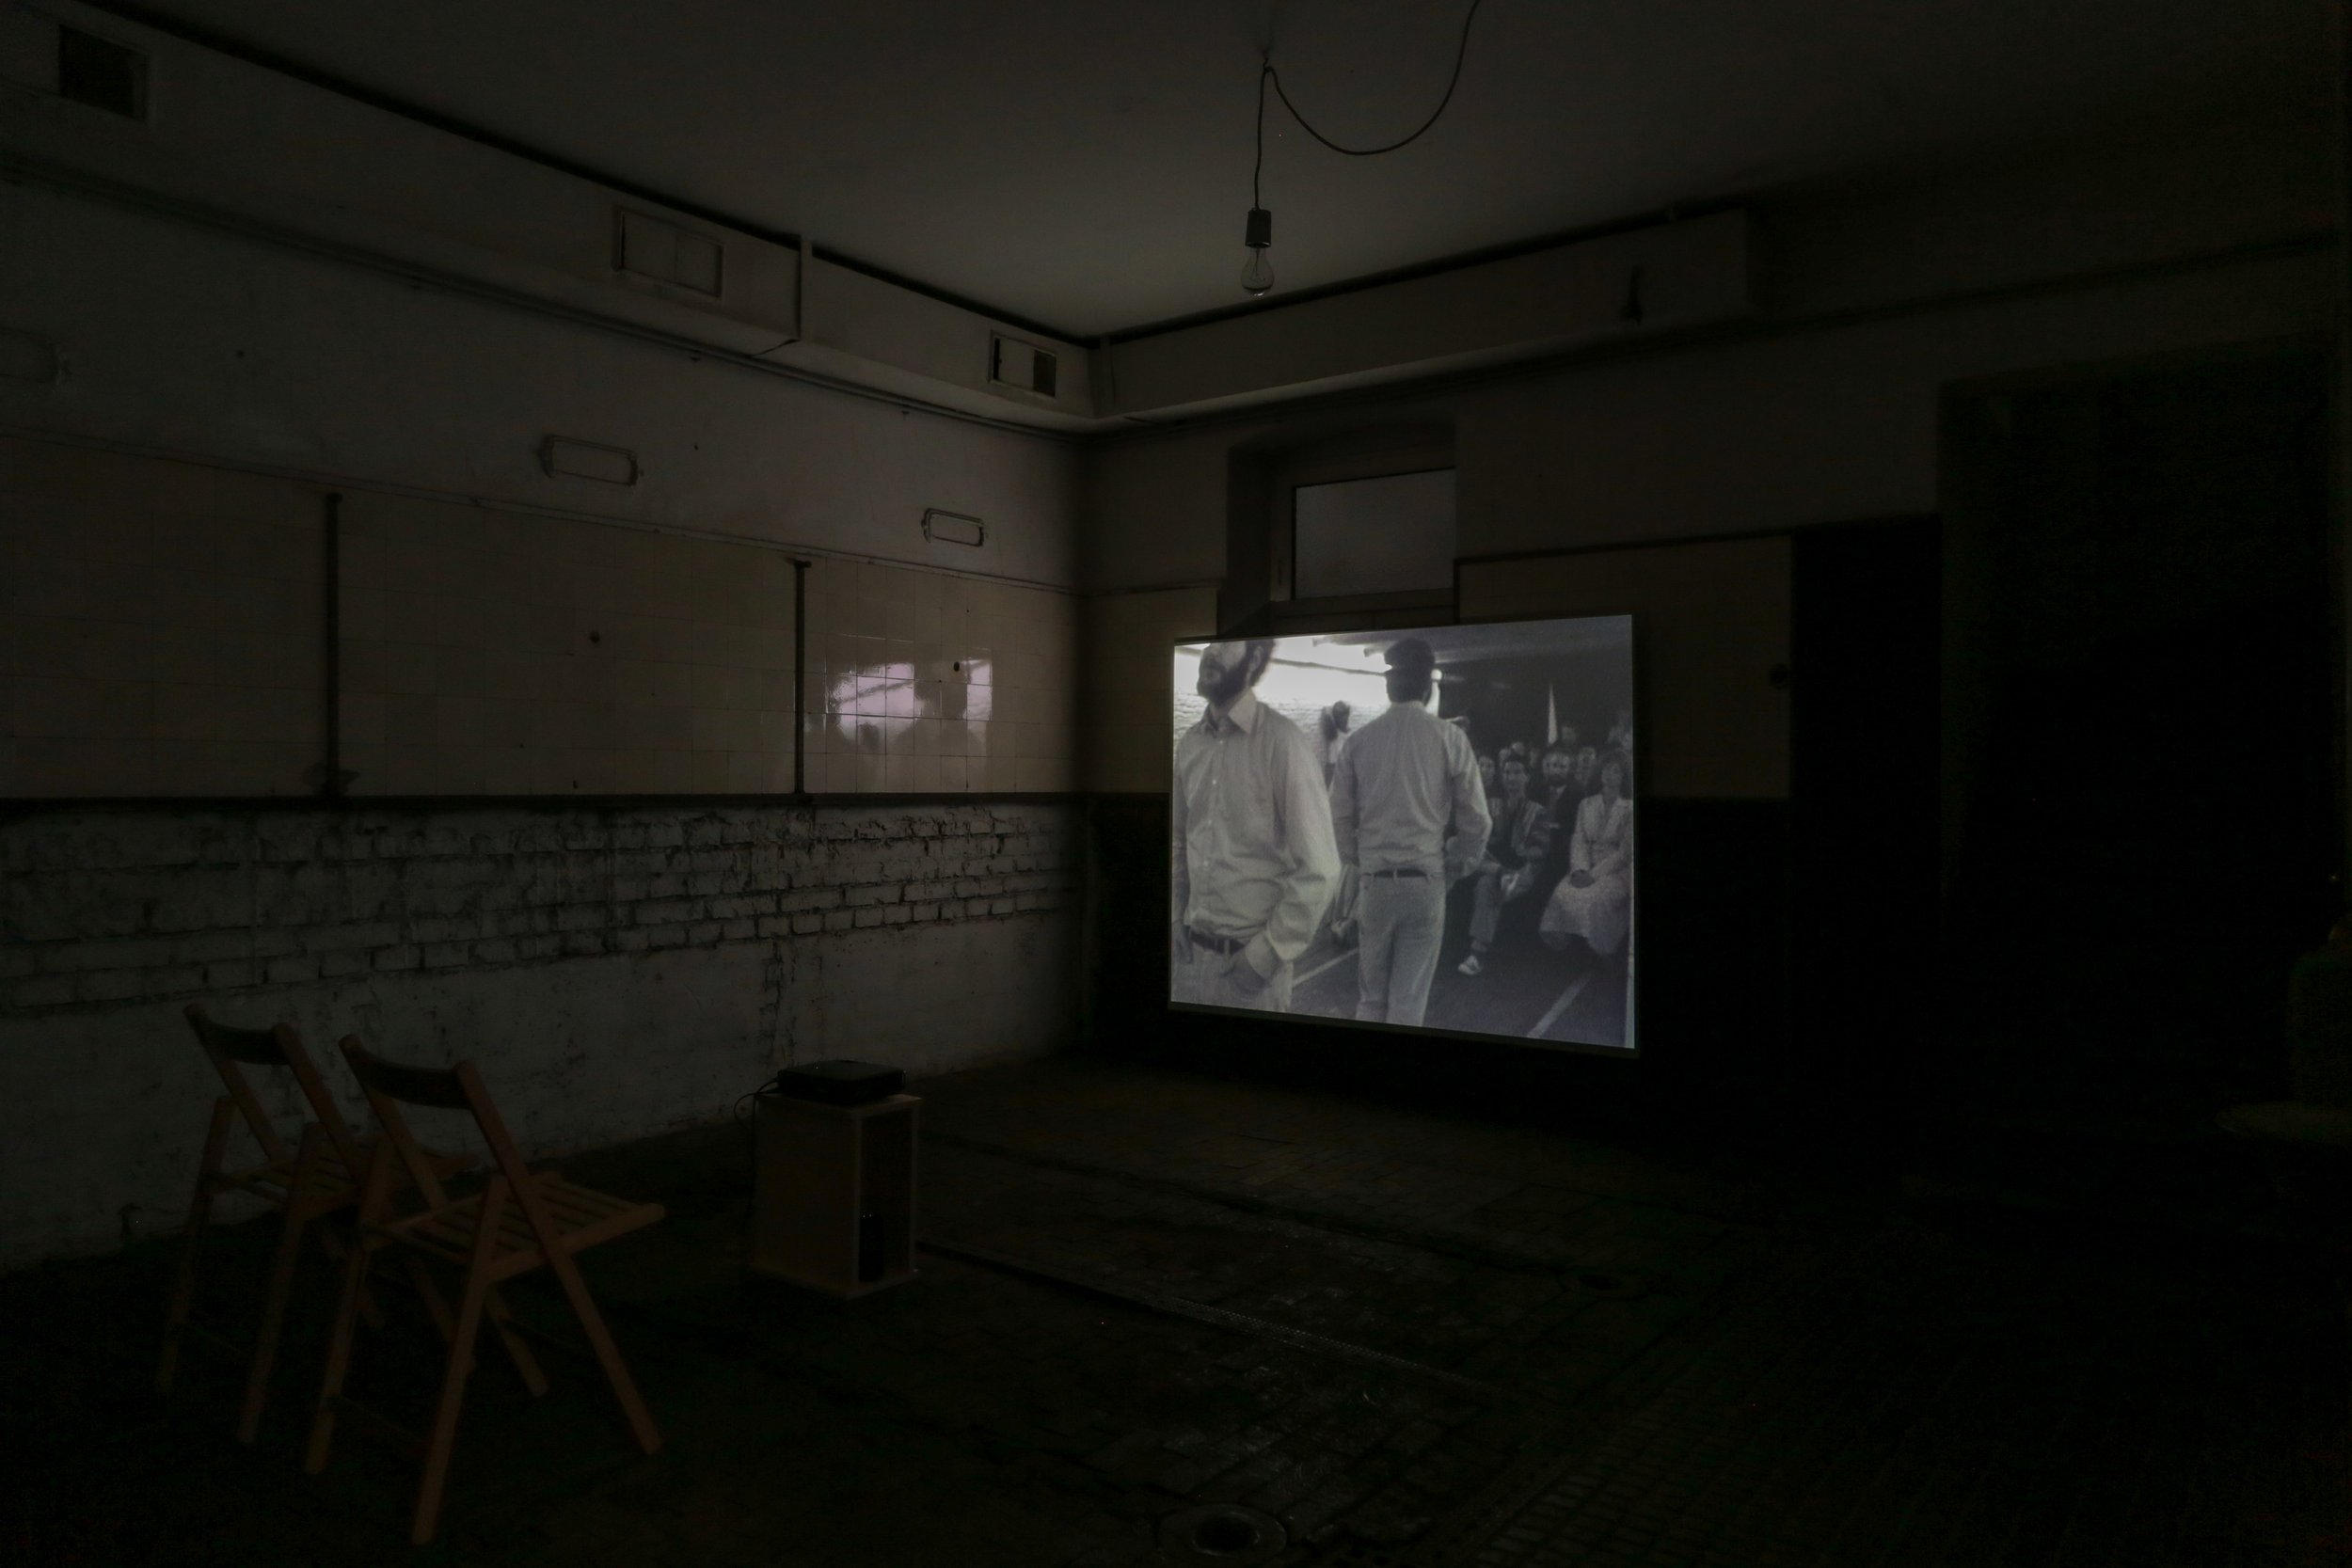   fig3 installation view Dan Graham, Audience/Performer/Mirror, 1977, 00:17:45., In collections: De Appel, LIMA  